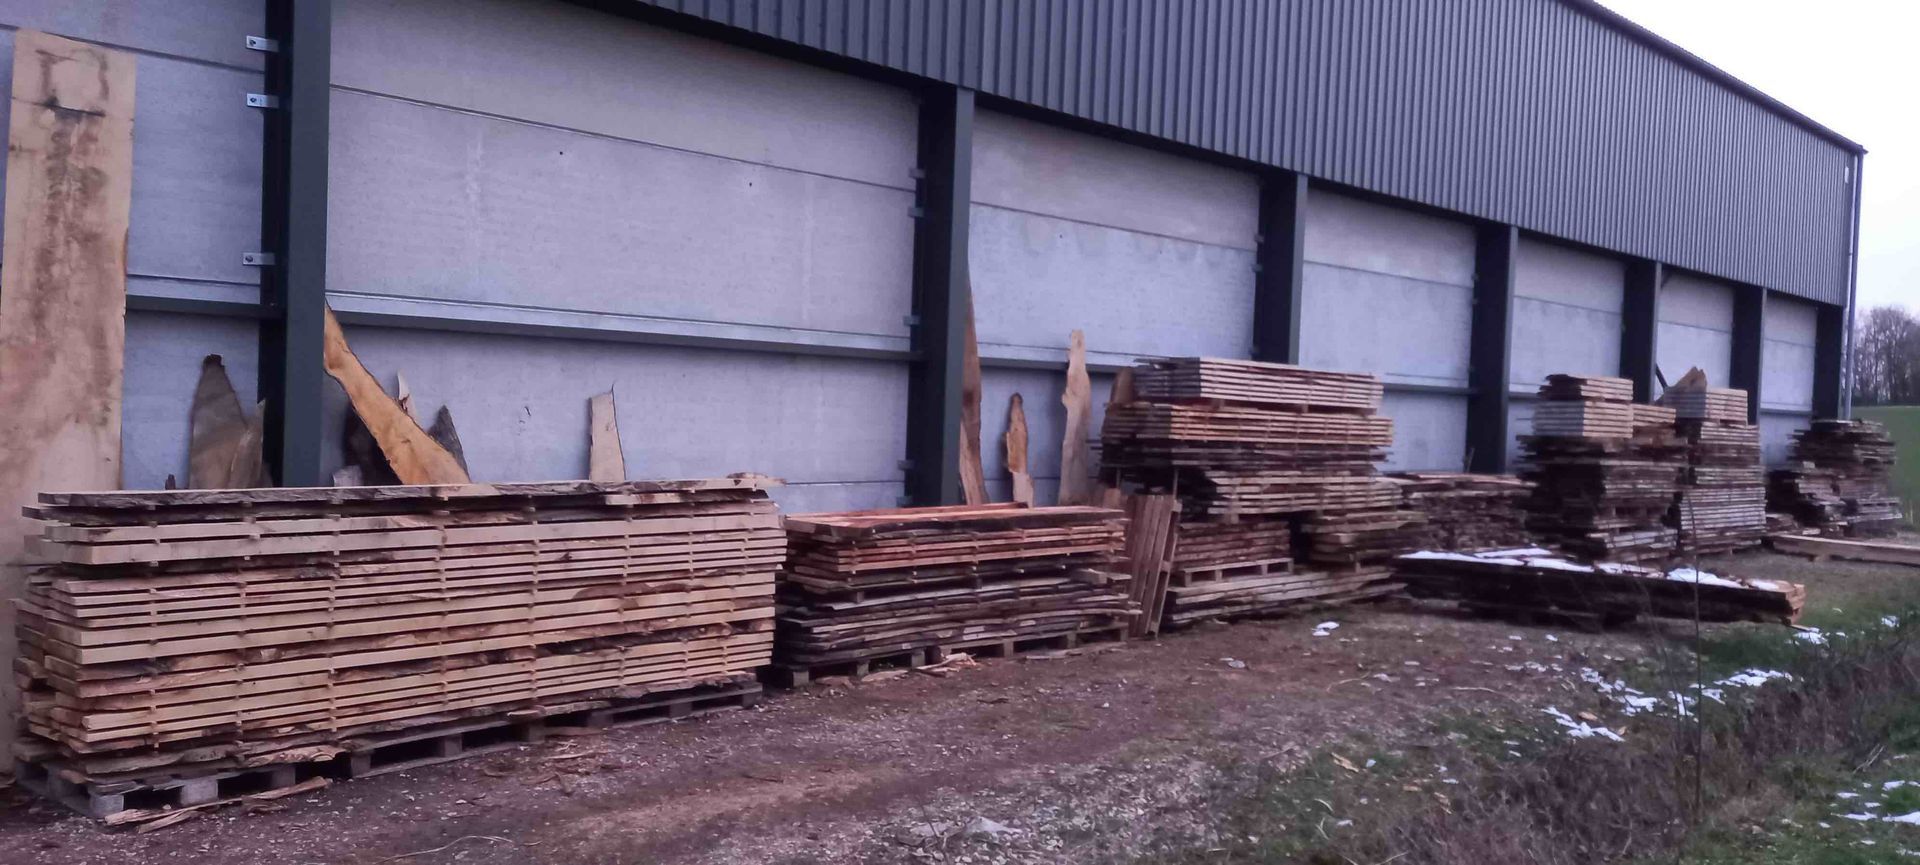 Image of air drying stacks of timber